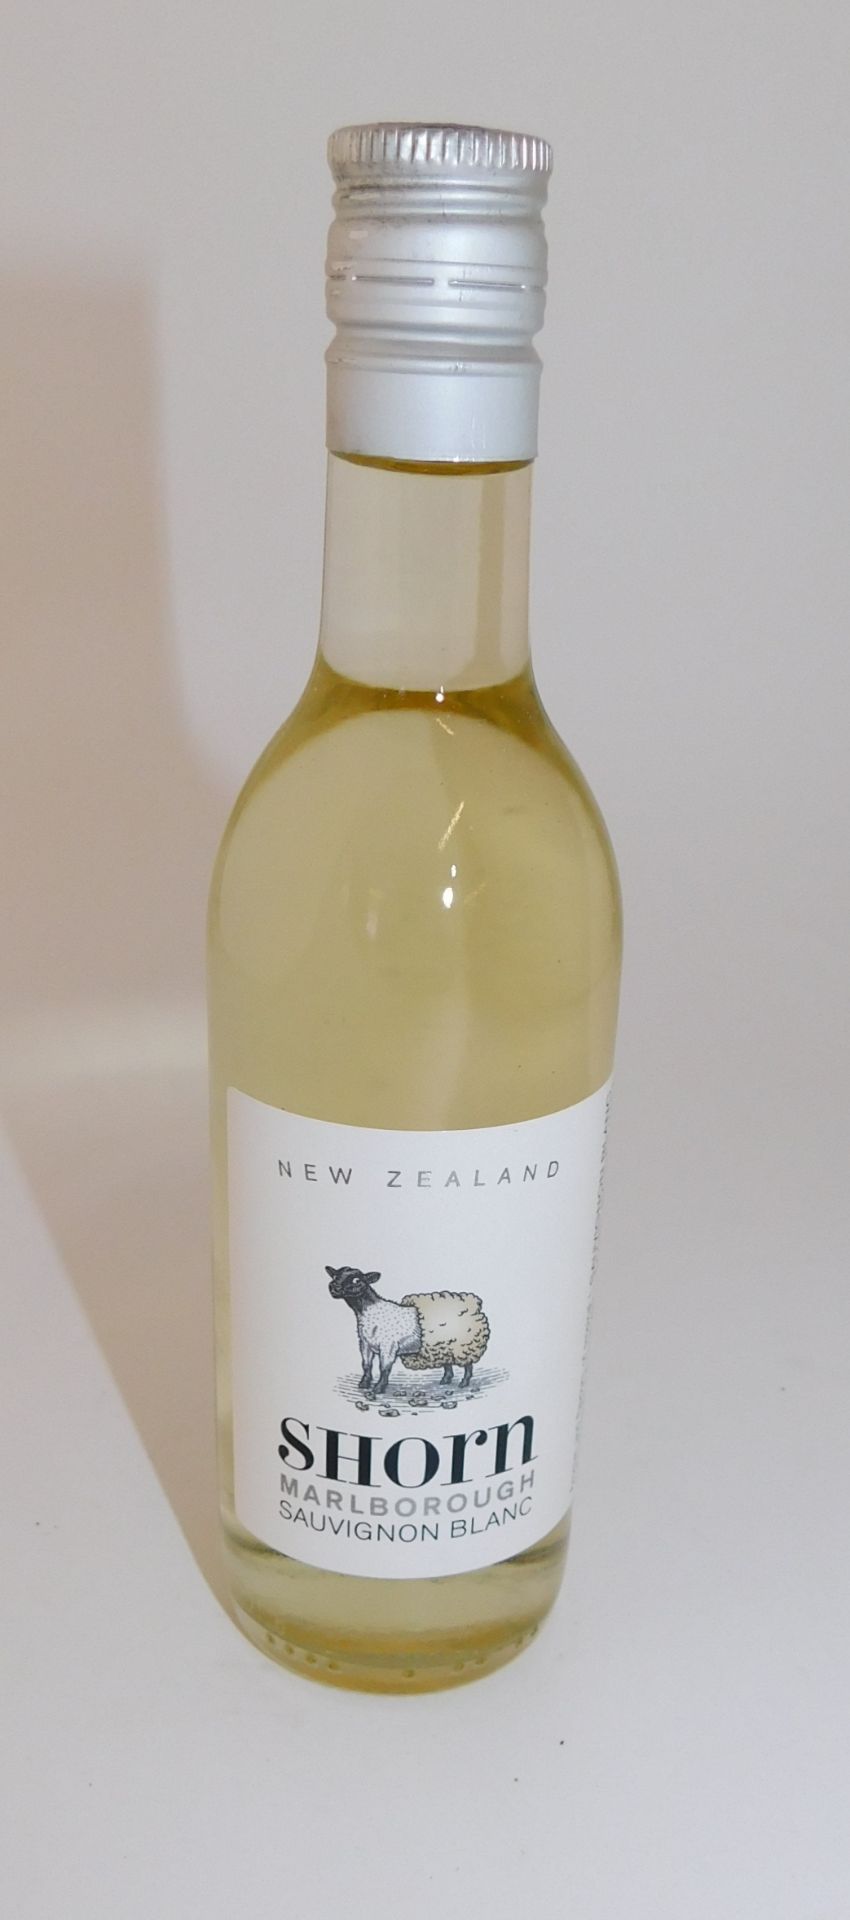 48 Bottles Shorn Sauvignon Blanc, 187ml (Located Stockport – See General Notes for More Details)